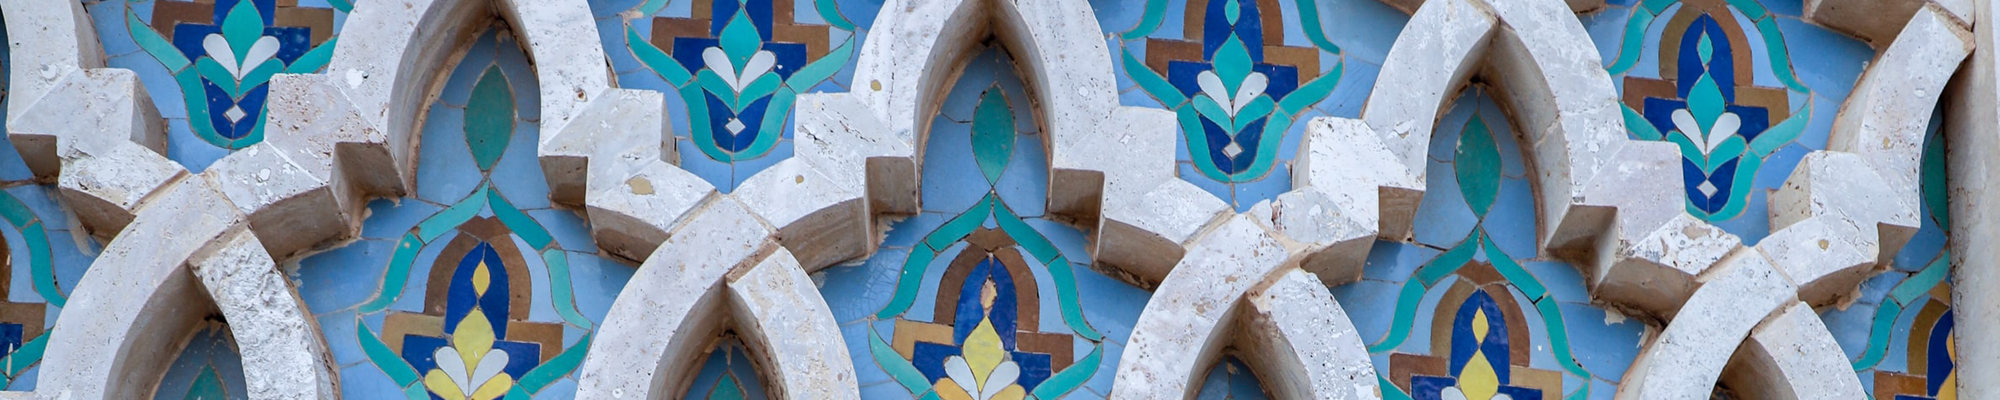 tiles on a mosque